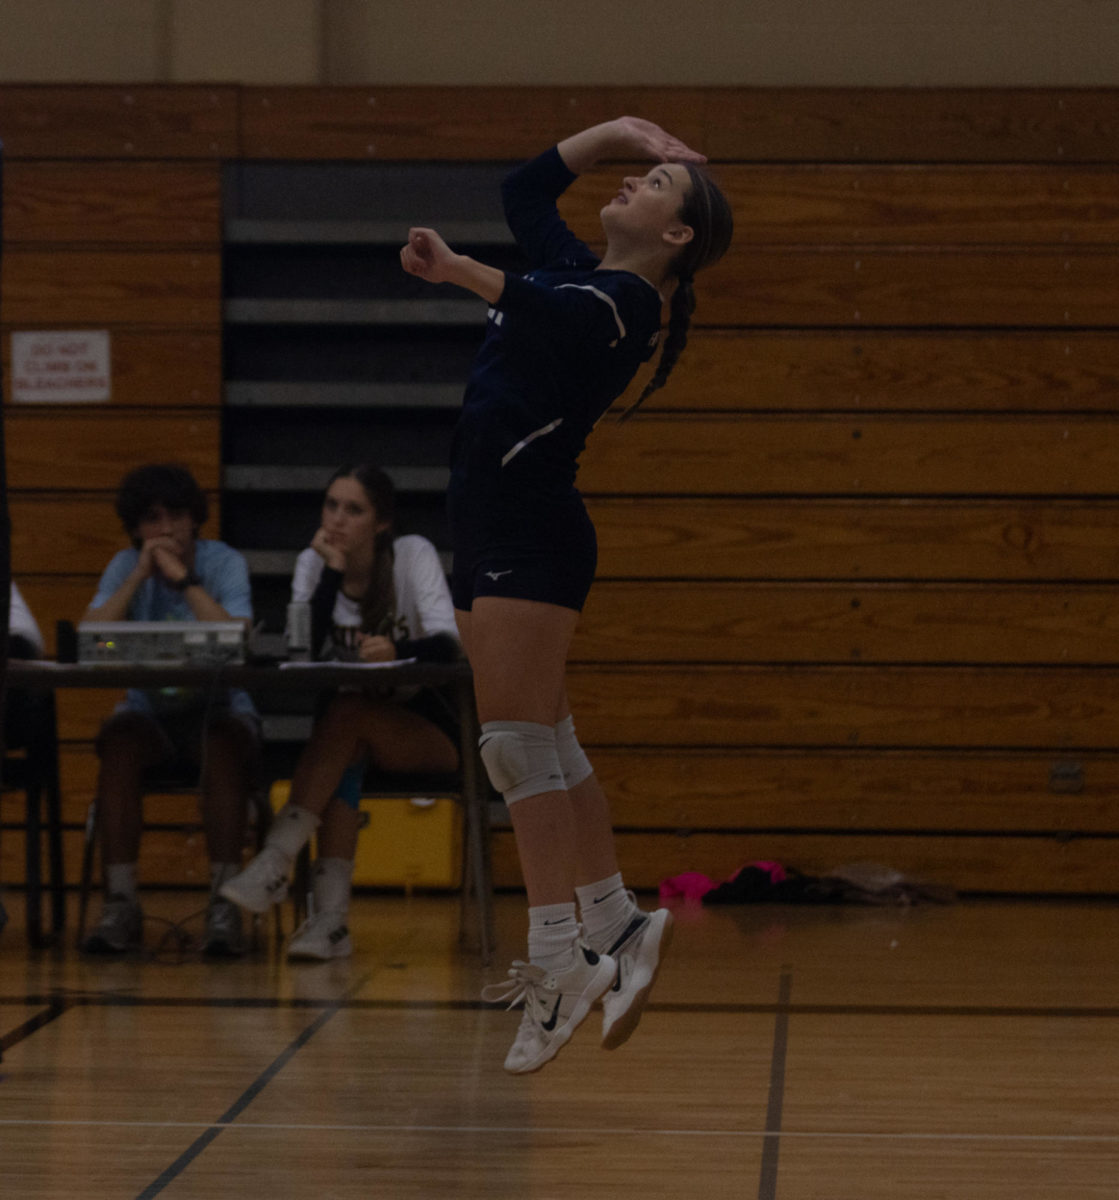 Keeley Welker springs into the air, prepared to get a kill and gain a point for her team.